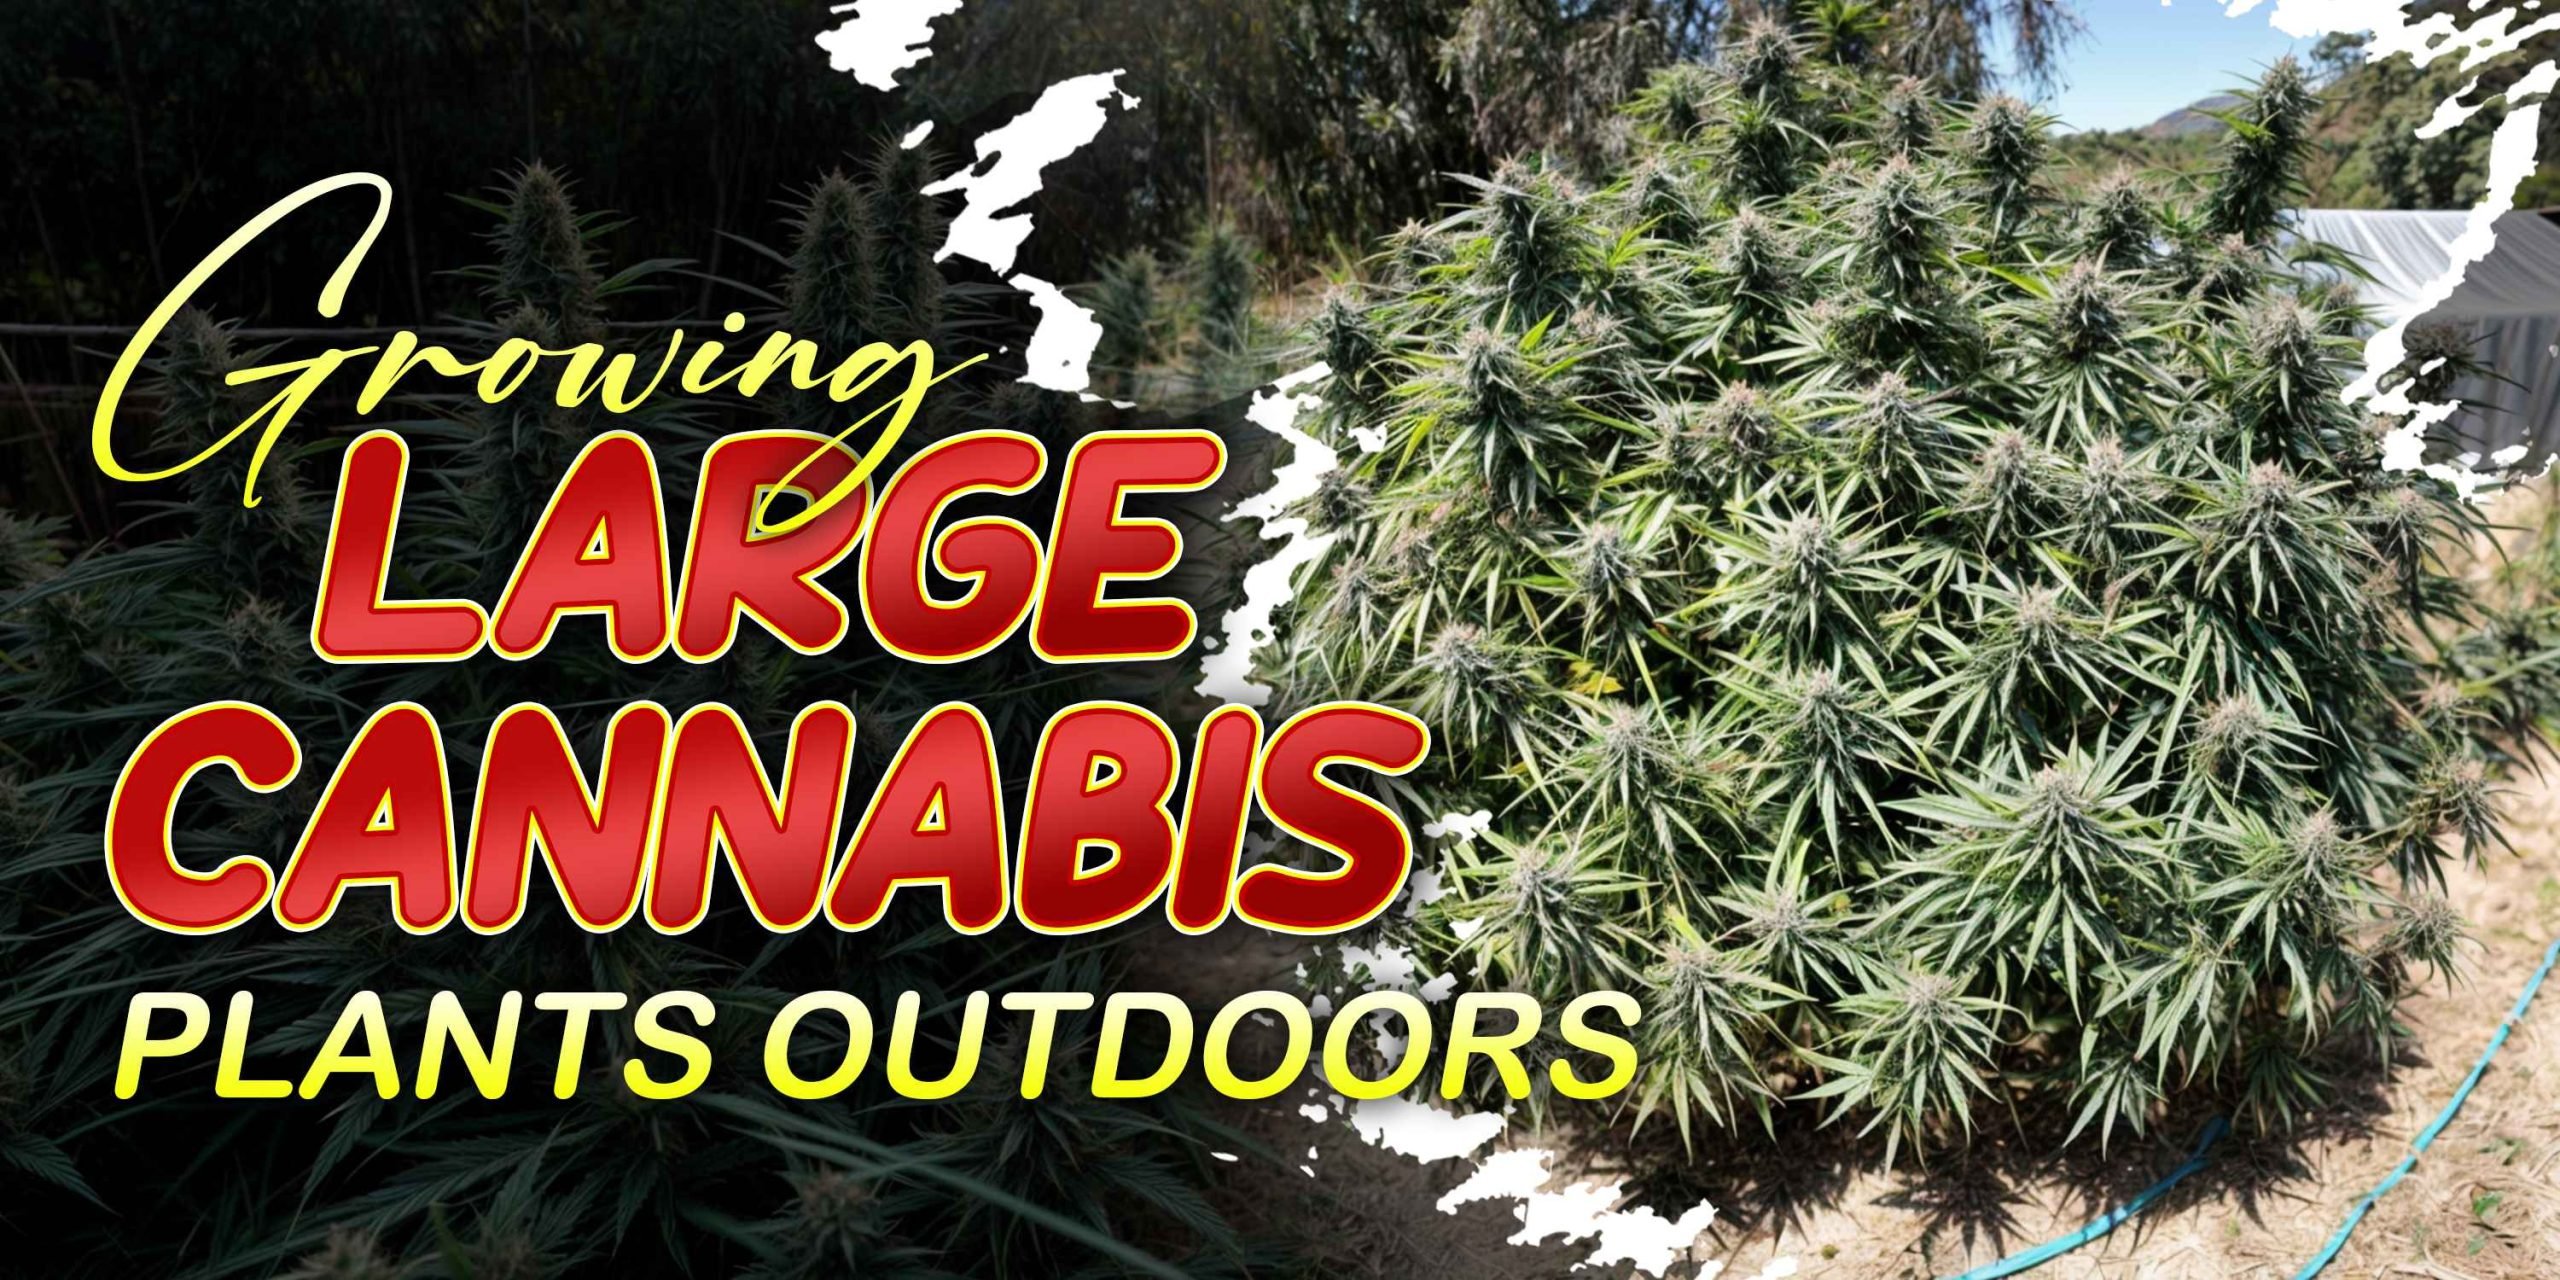 Freecompress Growing Large Cannabis Plants Outdoors Scaled, Crop King Seeds